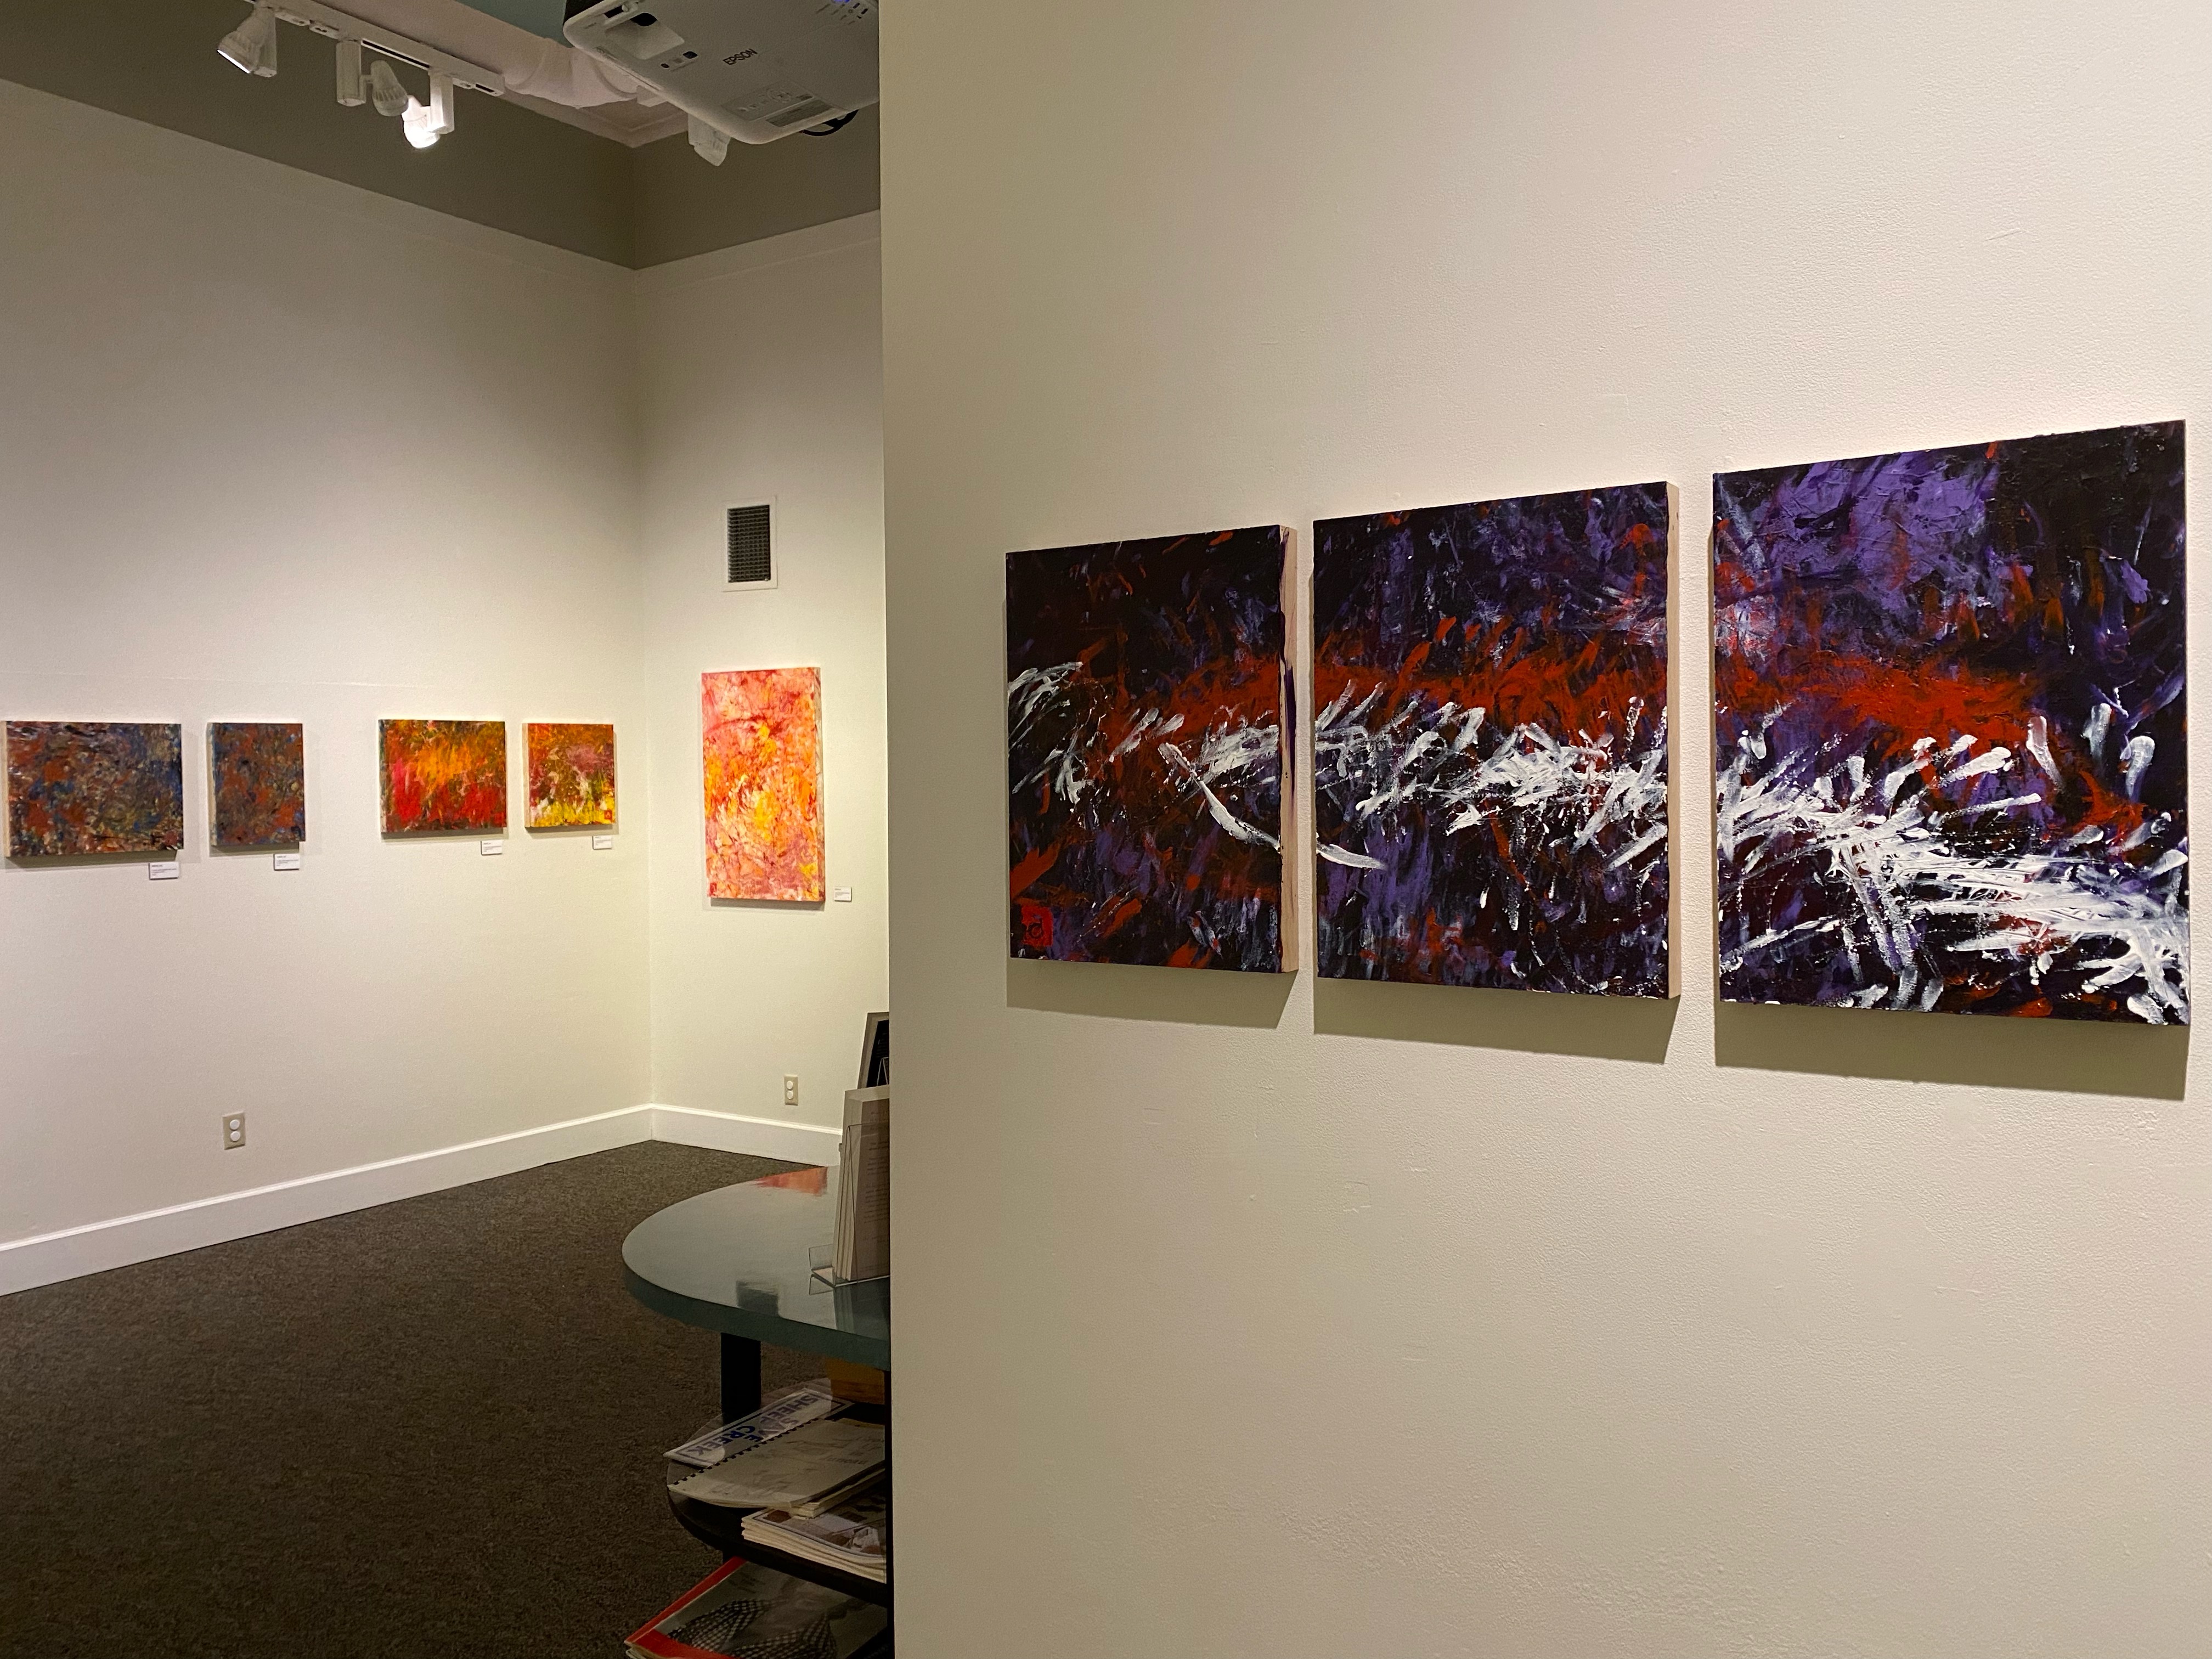 A new exhibit at the Juneau-Douglas City Museum features paintings created by local artist Avery Skaggs. Skaggs is in a wheelchair and is non-verbal, but expresses himself through art. (Photo by Bridget Dowd / KTOO)